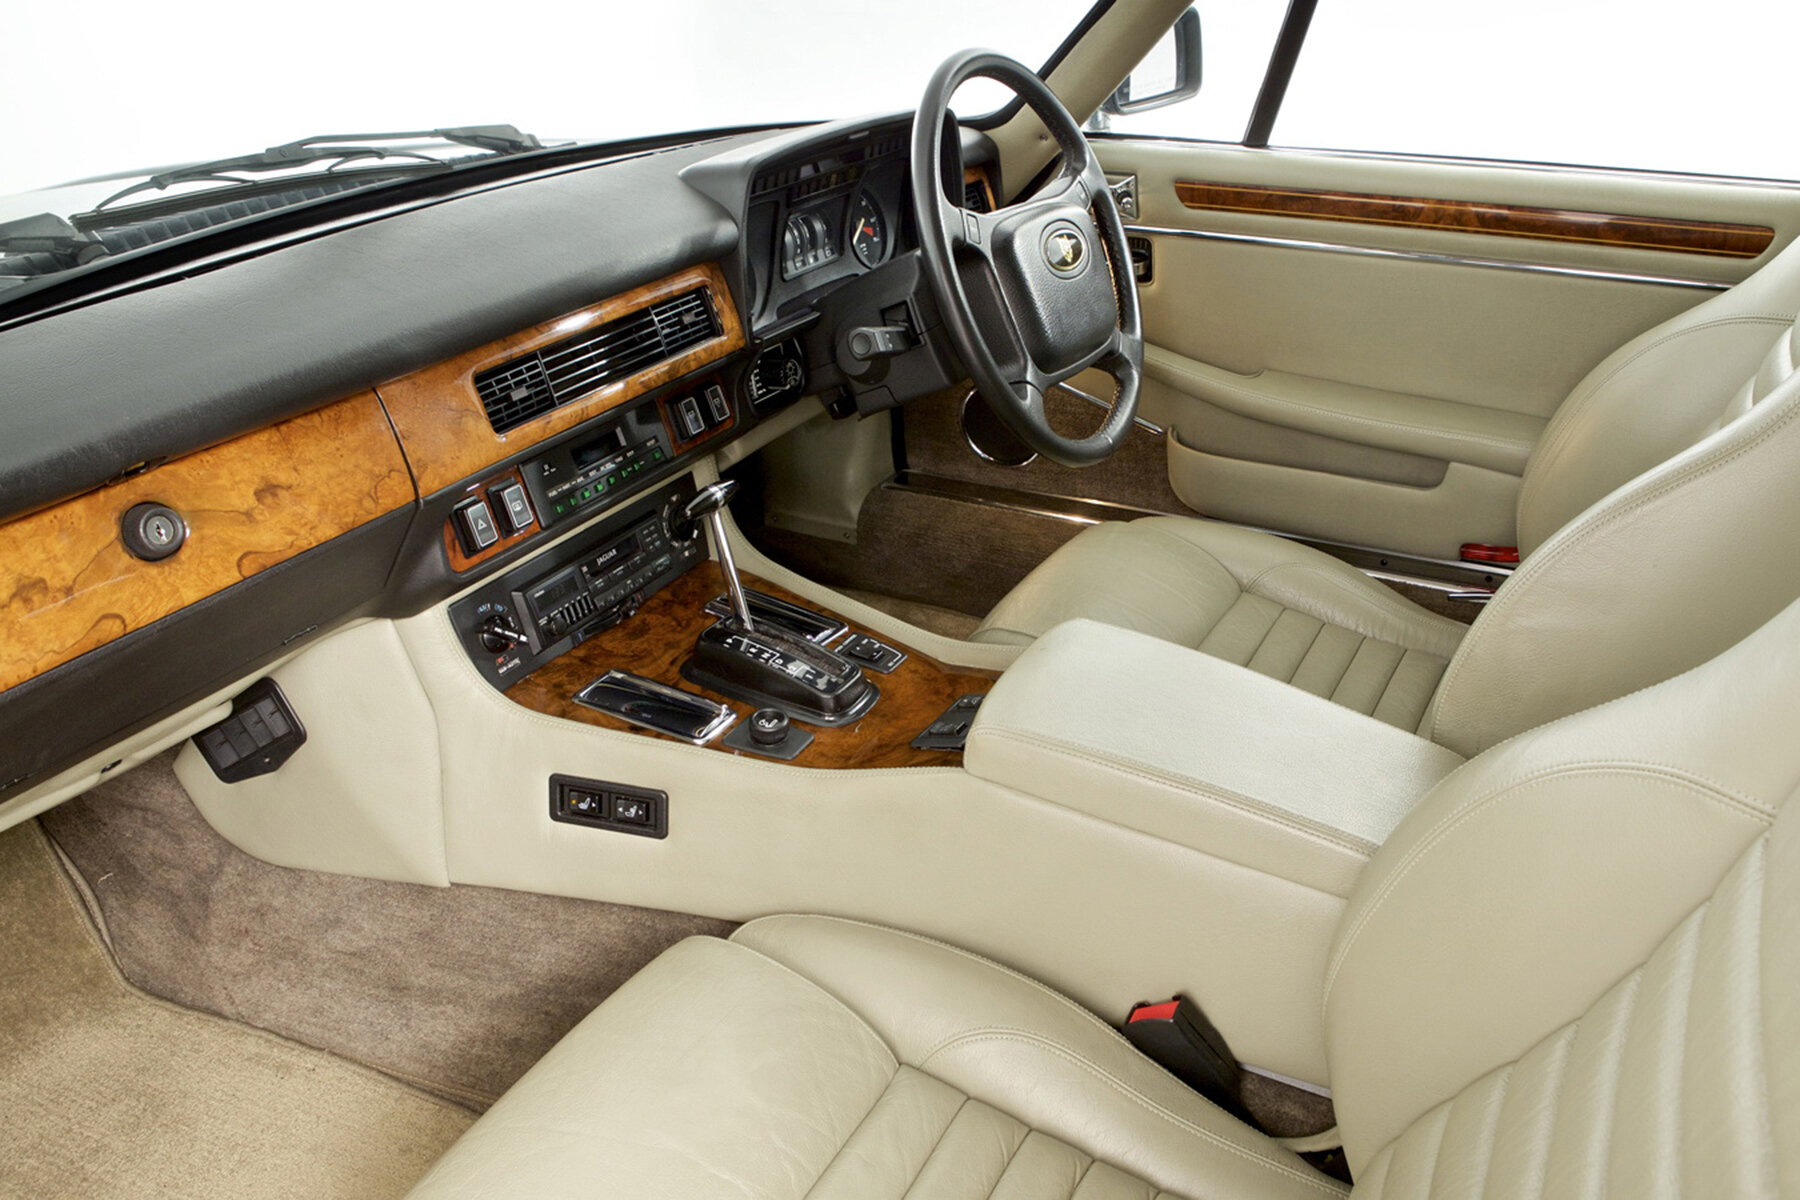 Late-spec Jaguar XJS interior had excellent seats, smaller steering wheel, and an the archaic transmission selector